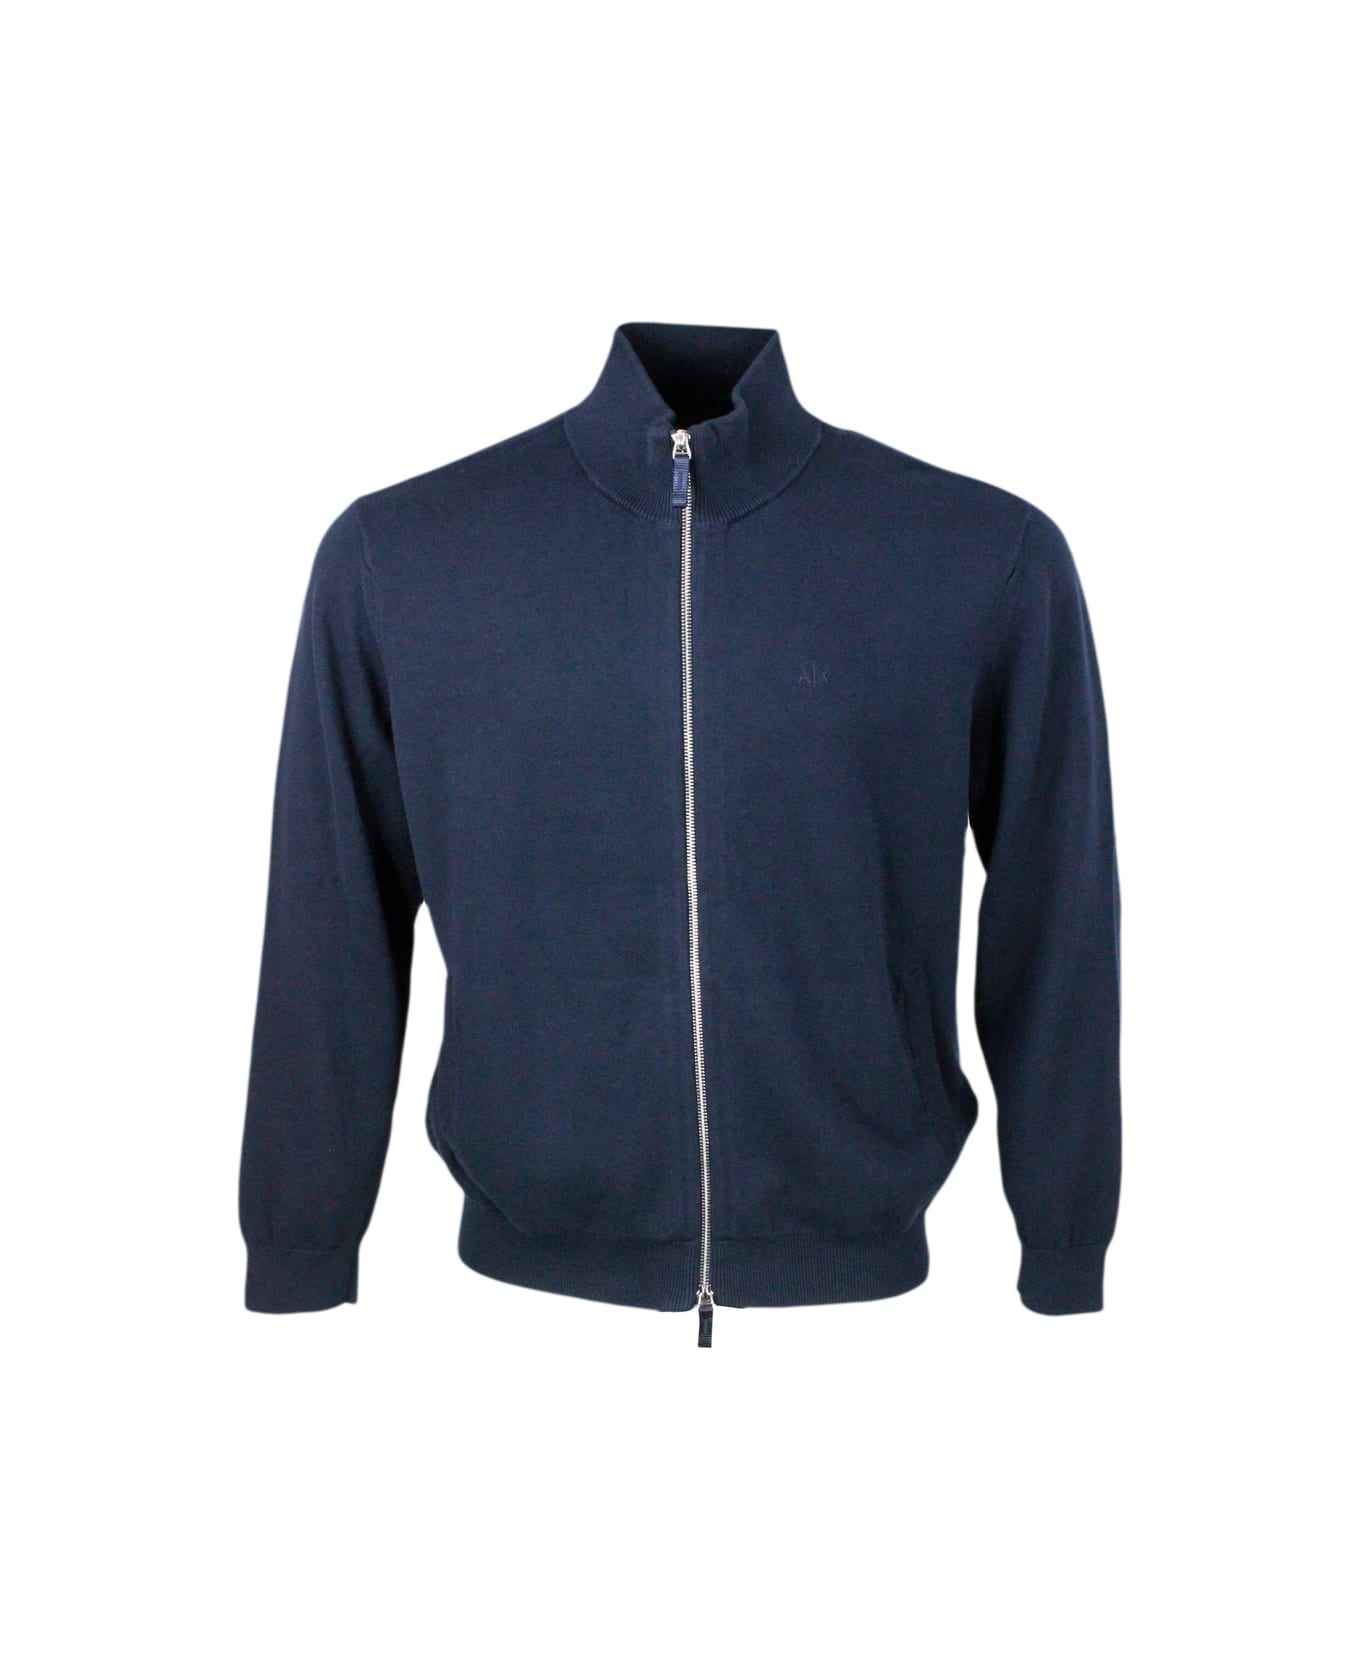 Armani Collezioni Lightweight Full Zip Long-sleeved Shirt Made Of 100% Cotton With Side Pockets - Blu